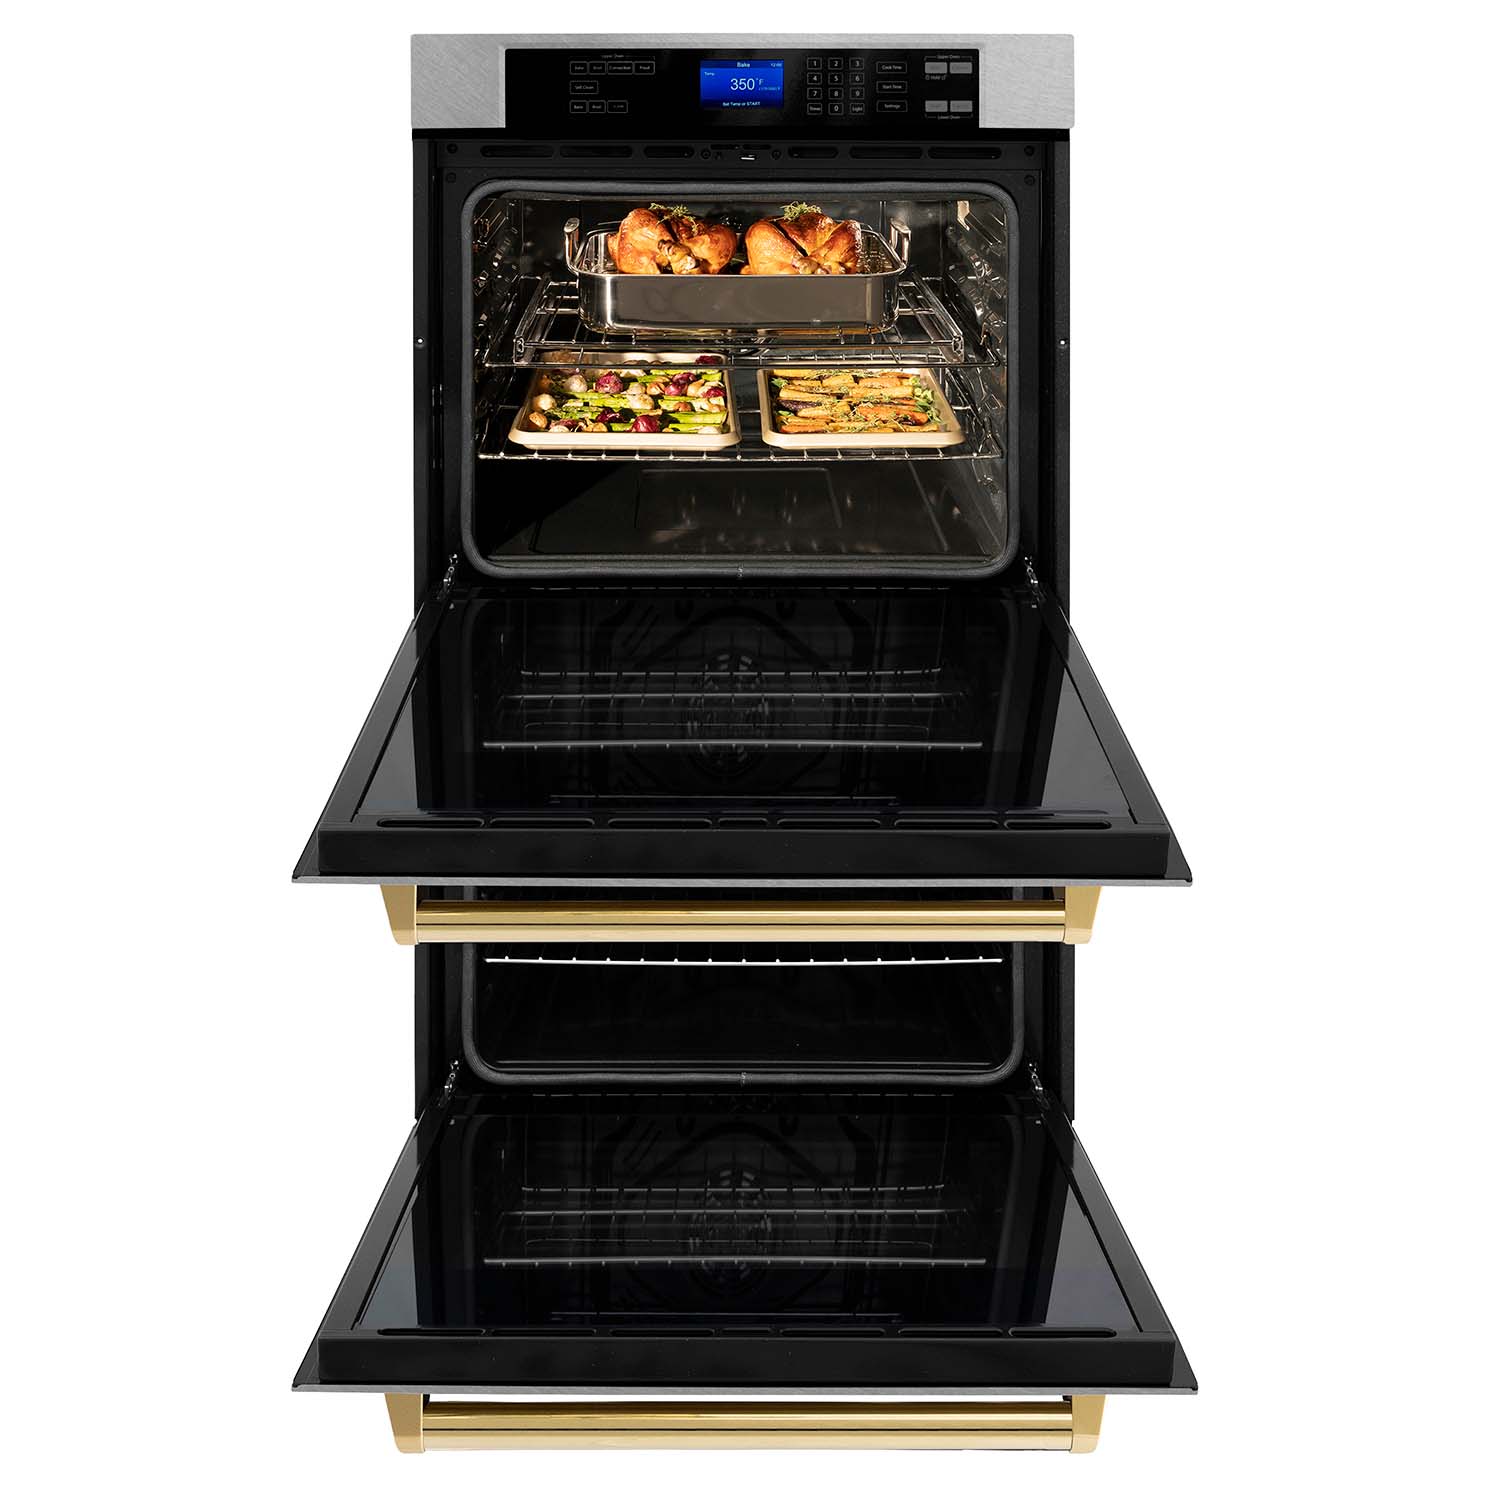 ZLINE 30" Autograph Edition Electric Double Wall Oven - DuraSnow Stainless Steel with Accents, Self Clean, True Convection